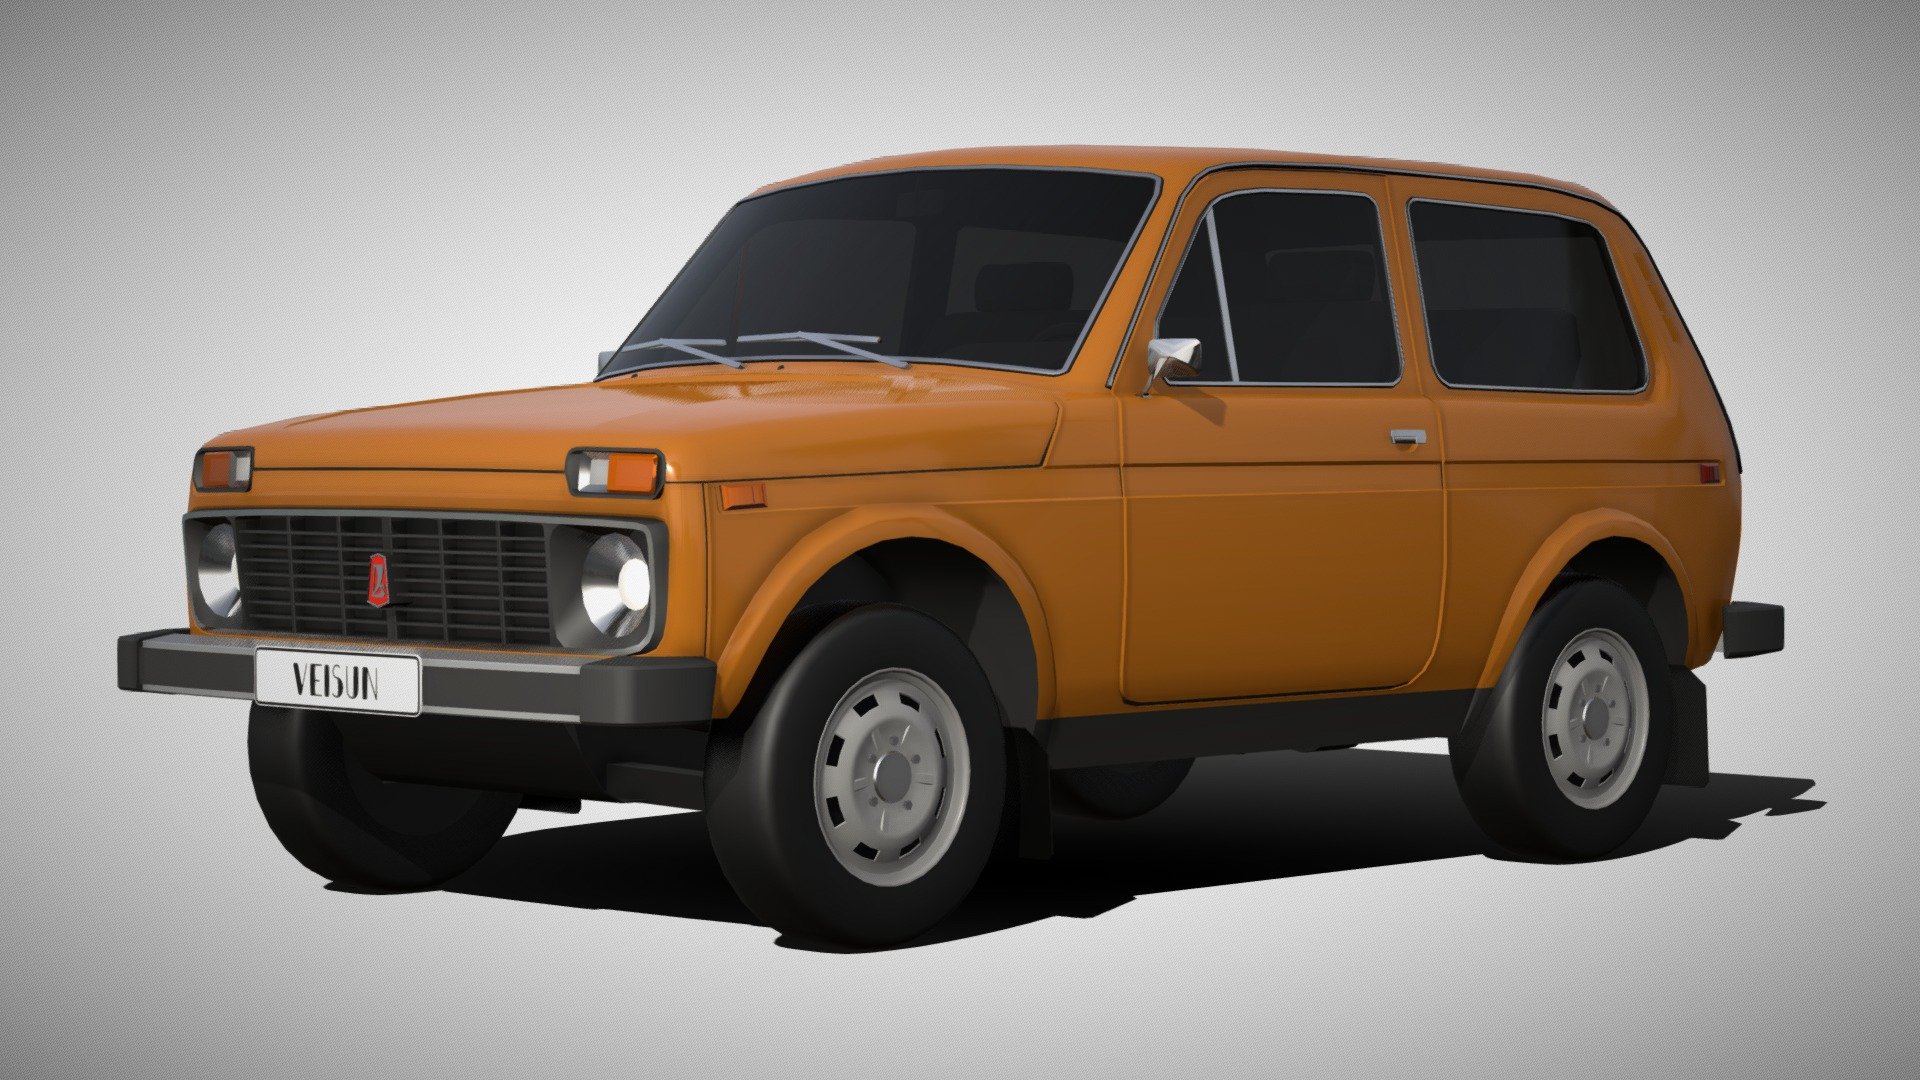 Lada Niva (VAZ 2121) - This is a Soviet-Russian small-class SUV with a load-bearing body and permanent all-wheel drive.

Wikipedia - (https://en.wikipedia.org/wiki/Lada_Niva).

Here is the field of the 1st generation, which was produced from 1977 to 1993.

I made in Blender (2.93) 3d model